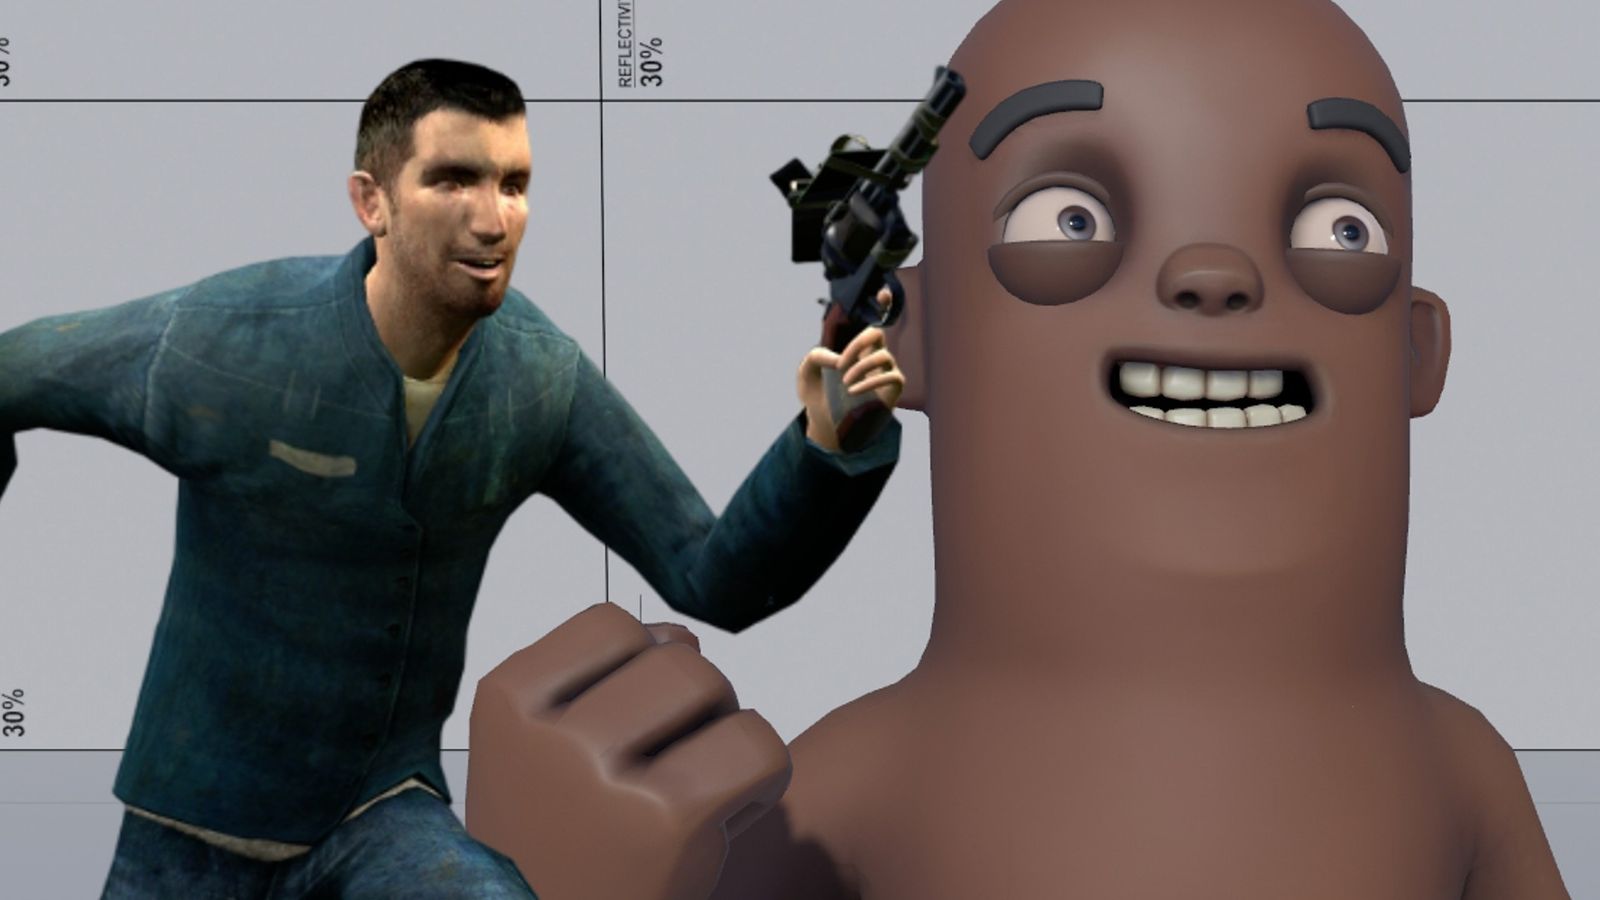 A character holding a Toolgun from Garry's Mod in front of the weird Sandbox character models